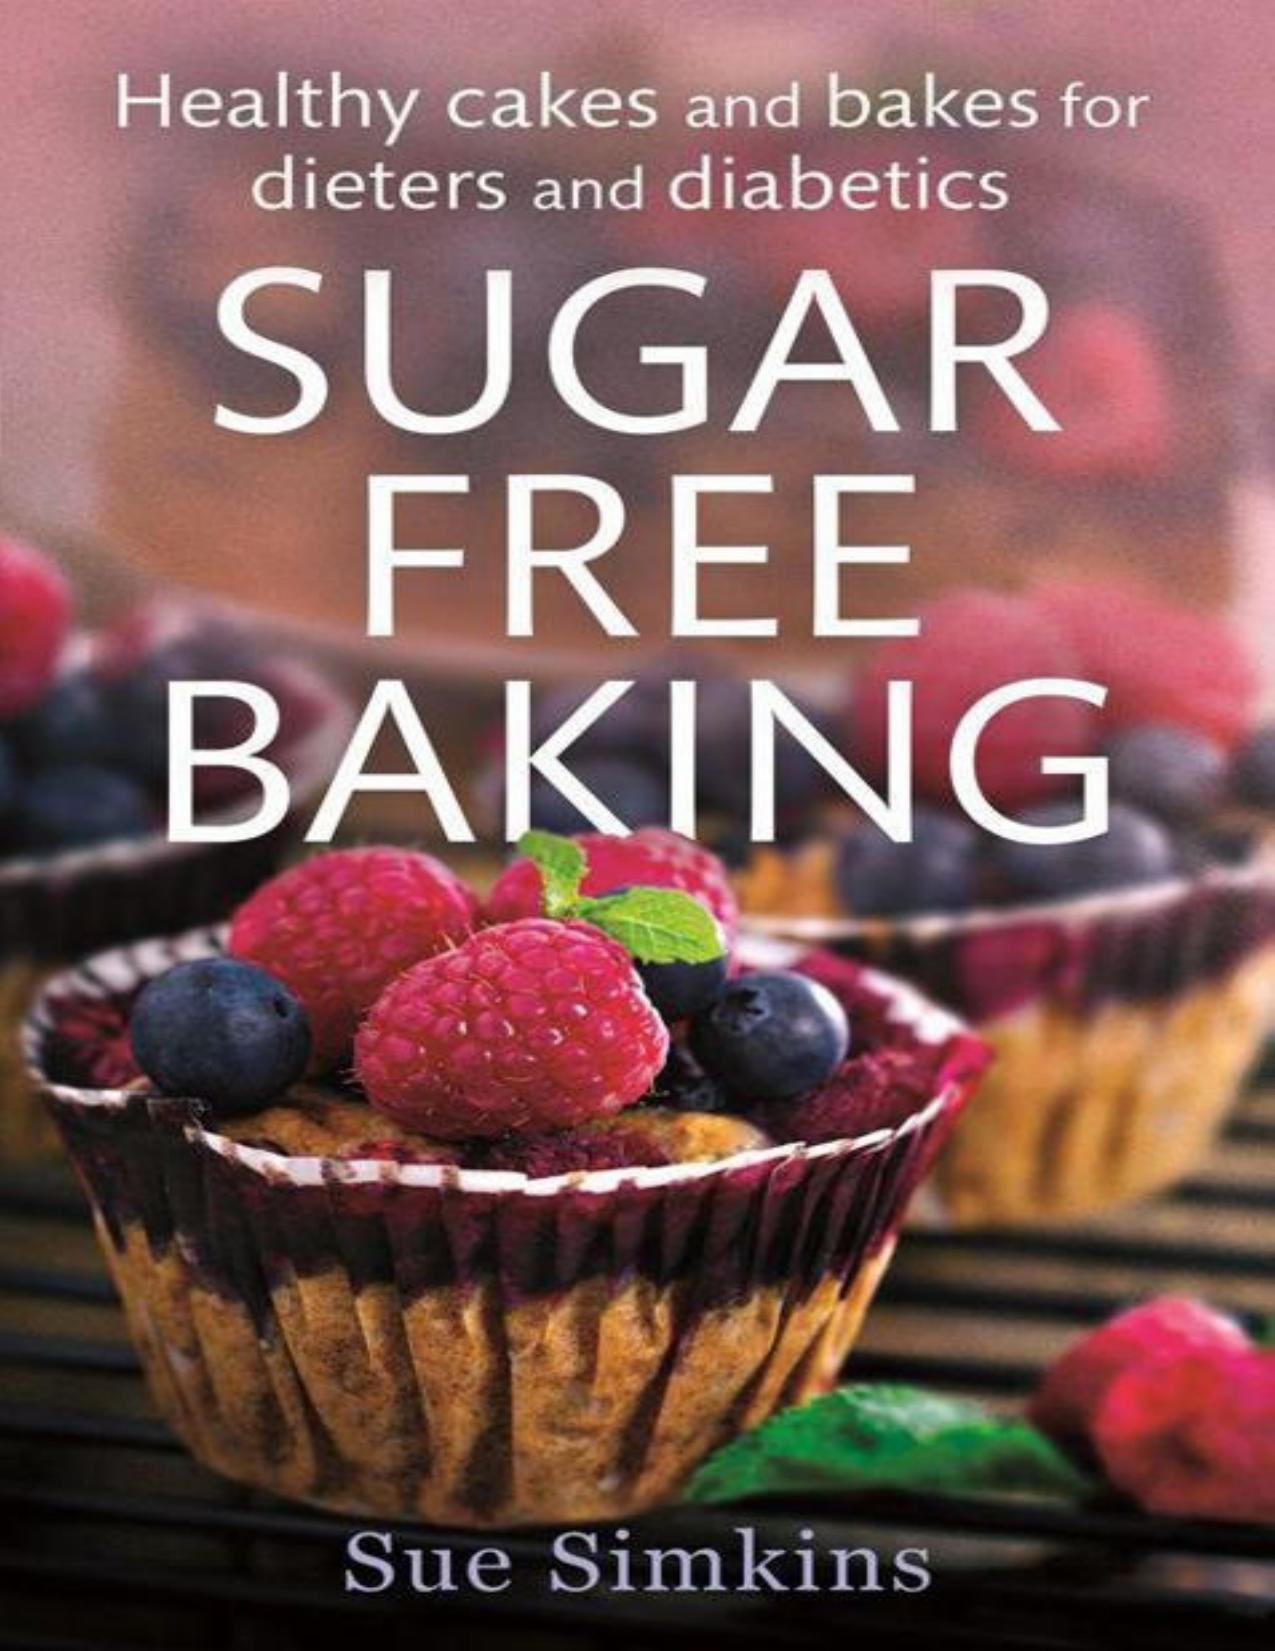 Sugar free baking : healthy cakes and bakes for dieters and diabetics - PDFDrive.com